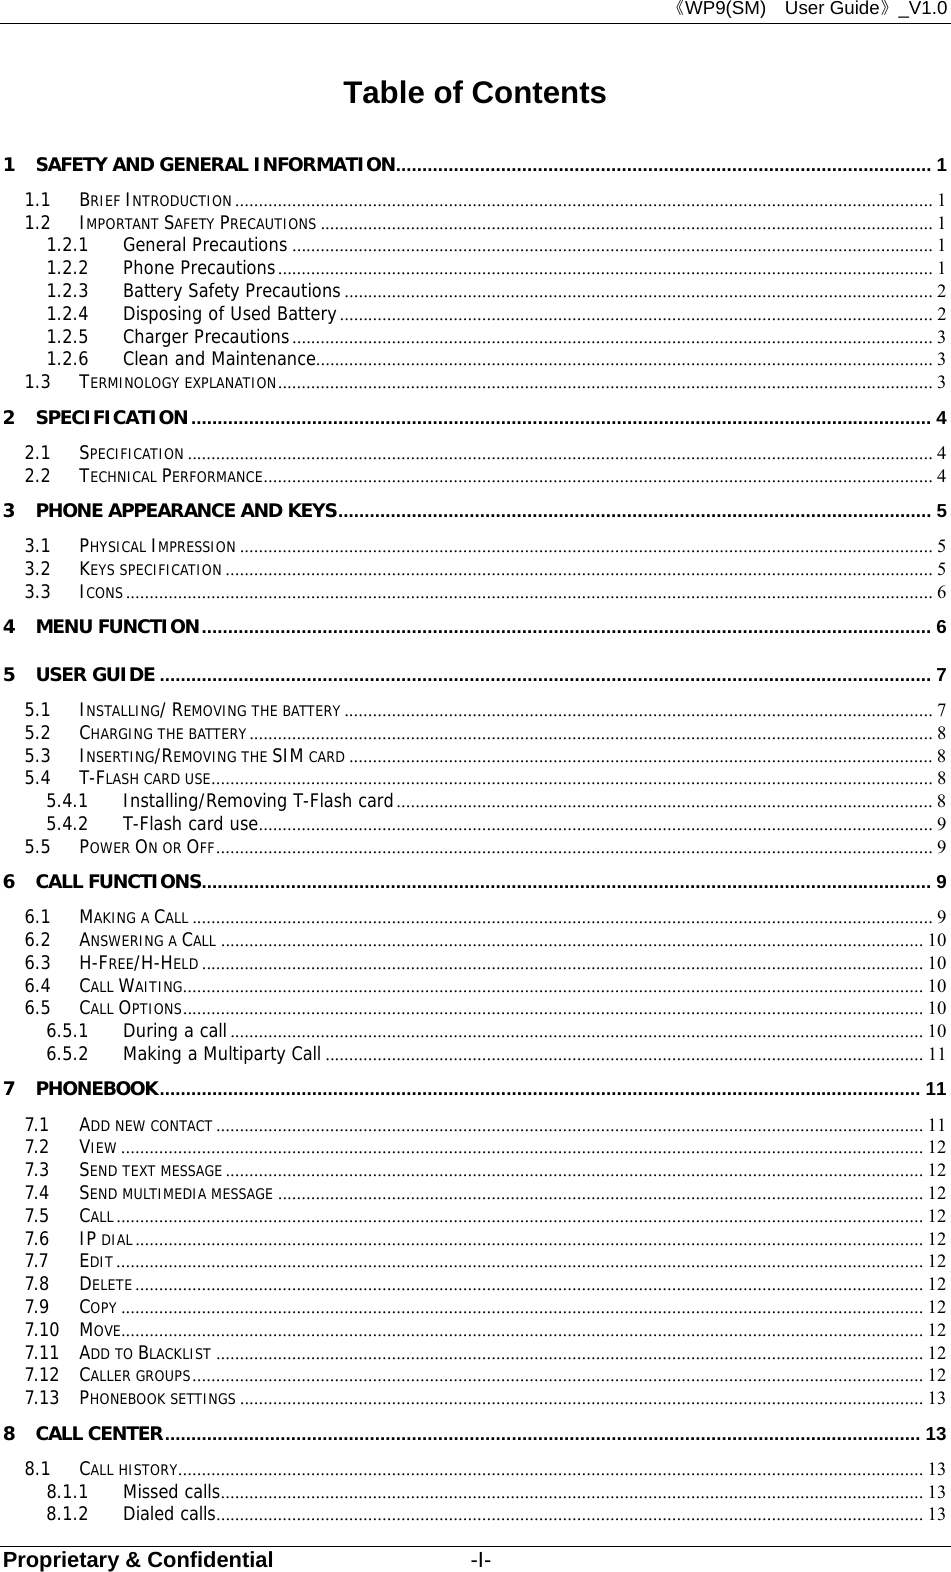 《WP9(SM)  User Guide》_V1.0 Proprietary &amp; Confidential                  -I- Table of Contents 1 SAFETY AND GENERAL INFORMATION ......................................................................................................  1 1.1 BRIEF INTRODUCTION ................................................................................................................................................... 1 1.2 IMPORTANT SAFETY PRECAUTIONS ................................................................................................................................. 1 1.2.1 General Precautions ....................................................................................................................................... 1 1.2.2 Phone Precautions .......................................................................................................................................... 1 1.2.3 Battery Safety Precautions ............................................................................................................................ 2 1.2.4 Disposing of Used Battery ............................................................................................................................. 2 1.2.5 Charger Precautions ....................................................................................................................................... 3 1.2.6 Clean and Maintenance.................................................................................................................................. 3 1.3 TERMINOLOGY EXPLANATION .......................................................................................................................................... 3 2 SPECIFICATION ............................................................................................................................................. 4 2.1 SPECIFICATION ............................................................................................................................................................. 4 2.2 TECHNICAL PERFORMANCE ............................................................................................................................................. 4 3 PHONE APPEARANCE AND KEYS ................................................................................................................. 5 3.1 PHYSICAL IMPRESSION .................................................................................................................................................. 5 3.2 KEYS SPECIFICATION ..................................................................................................................................................... 5 3.3 ICONS .......................................................................................................................................................................... 6 4 MENU FUNCTION ........................................................................................................................................... 6 5 USER GUIDE ................................................................................................................................................... 7 5.1 INSTALLING/ REMOVING THE BATTERY ............................................................................................................................ 7 5.2 CHARGING THE BATTERY ................................................................................................................................................ 8 5.3 INSERTING/REMOVING THE SIM CARD ........................................................................................................................... 8 5.4 T-FLASH CARD USE ........................................................................................................................................................ 8 5.4.1 Installing/Removing T-Flash card ................................................................................................................. 8 5.4.2 T-Flash card use .............................................................................................................................................. 9 5.5 POWER ON OR OFF ....................................................................................................................................................... 9 6 CALL FUNCTIONS ........................................................................................................................................... 9 6.1 MAKING A CALL ............................................................................................................................................................ 9 6.2 ANSWERING A CALL .................................................................................................................................................... 10 6.3 H-FREE/H-HELD ........................................................................................................................................................ 10 6.4 CALL WAITING ............................................................................................................................................................ 10 6.5 CALL OPTIONS ............................................................................................................................................................ 10 6.5.1 During a call .................................................................................................................................................. 10 6.5.2 Making a Multiparty Call .............................................................................................................................. 11 7 PHONEBOOK ................................................................................................................................................. 11 7.1 ADD NEW CONTACT ..................................................................................................................................................... 11 7.2 VIEW ......................................................................................................................................................................... 12 7.3 SEND TEXT MESSAGE ................................................................................................................................................... 12 7.4 SEND MULTIMEDIA MESSAGE ........................................................................................................................................ 12 7.5 CALL .......................................................................................................................................................................... 12 7.6 IP DIAL ...................................................................................................................................................................... 12 7.7 EDIT .......................................................................................................................................................................... 12 7.8 DELETE ...................................................................................................................................................................... 12 7.9 COPY ......................................................................................................................................................................... 12 7.10 MOVE......................................................................................................................................................................... 12 7.11 ADD TO BLACKLIST ..................................................................................................................................................... 12 7.12 CALLER GROUPS .......................................................................................................................................................... 12 7.13 PHONEBOOK SETTINGS ................................................................................................................................................ 13 8 CALL CENTER ................................................................................................................................................ 13 8.1 CALL HISTORY ............................................................................................................................................................. 13 8.1.1 Missed calls .................................................................................................................................................... 13 8.1.2 Dialed calls ..................................................................................................................................................... 13 